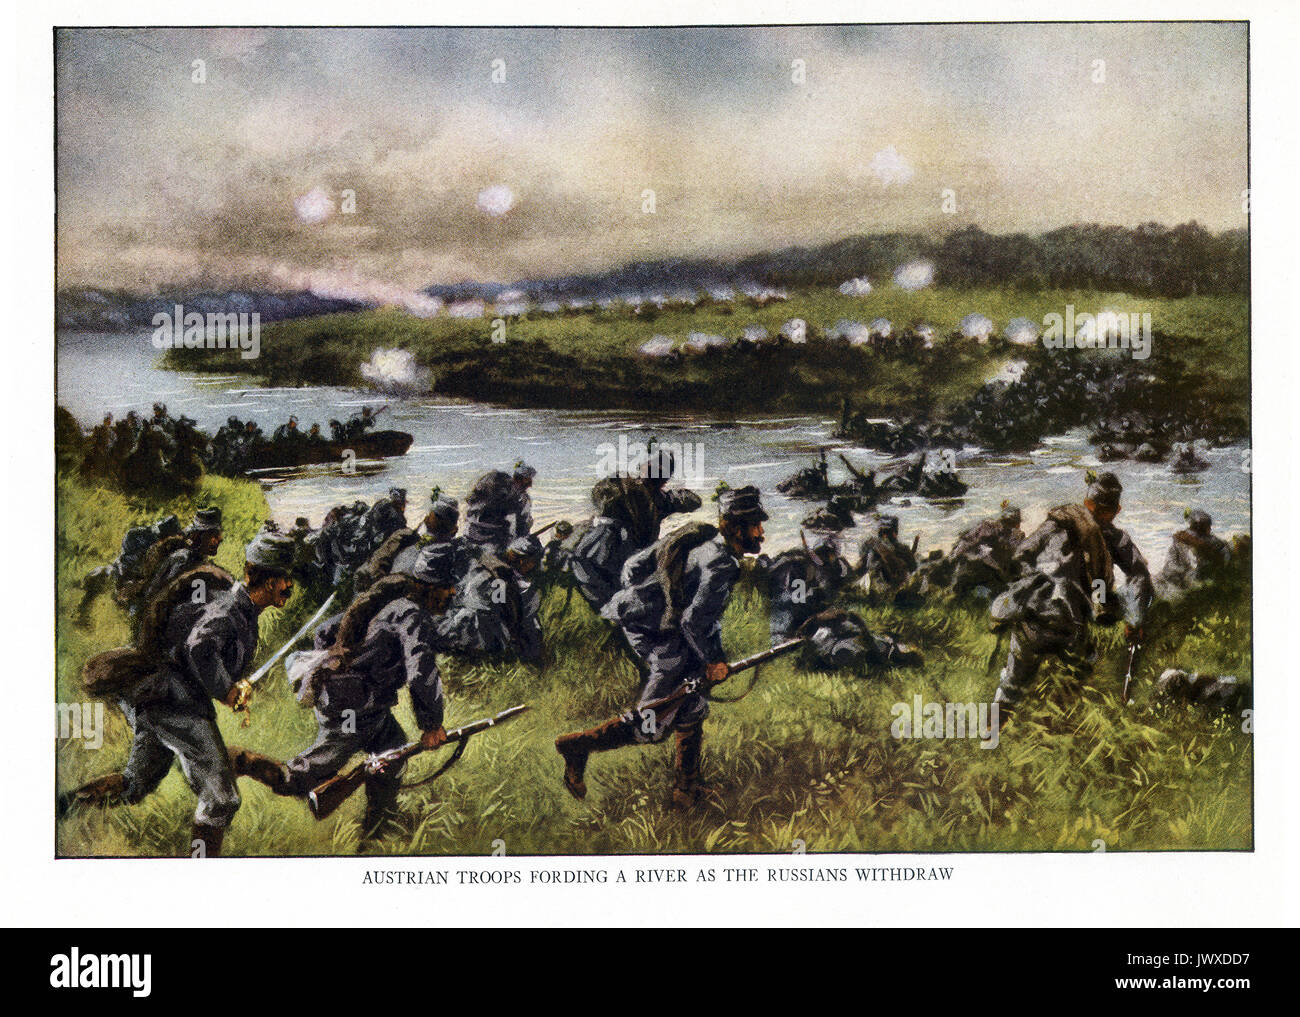 This illustration shows Austrian troops fording a river as the Russian withdraw - all in the early part of World War I. Stock Photo